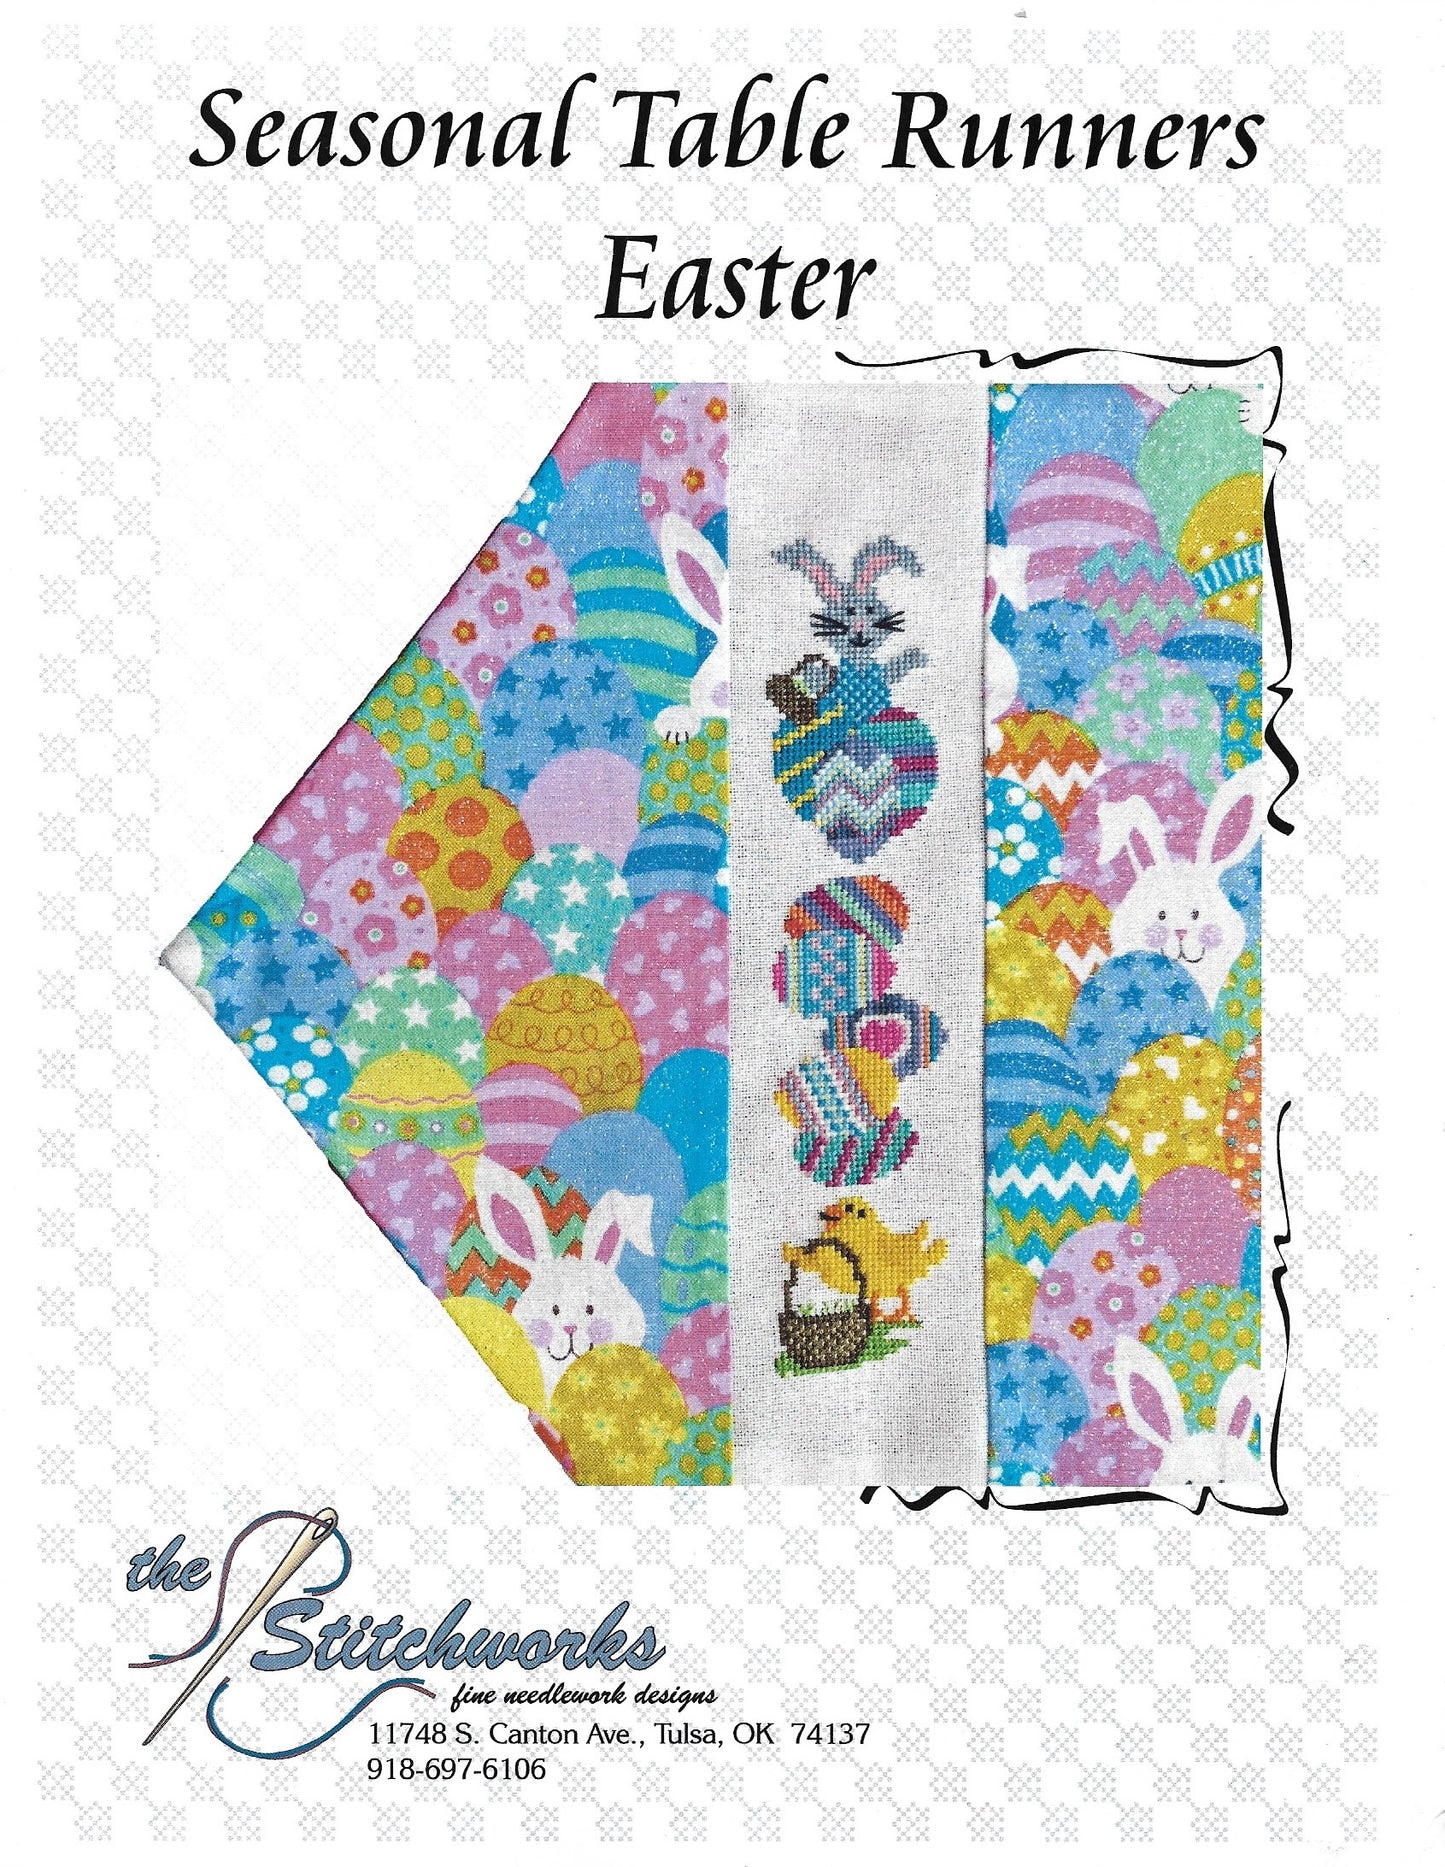 StitchWorks Seasonal Table Runners - Easter cross stitch pattern